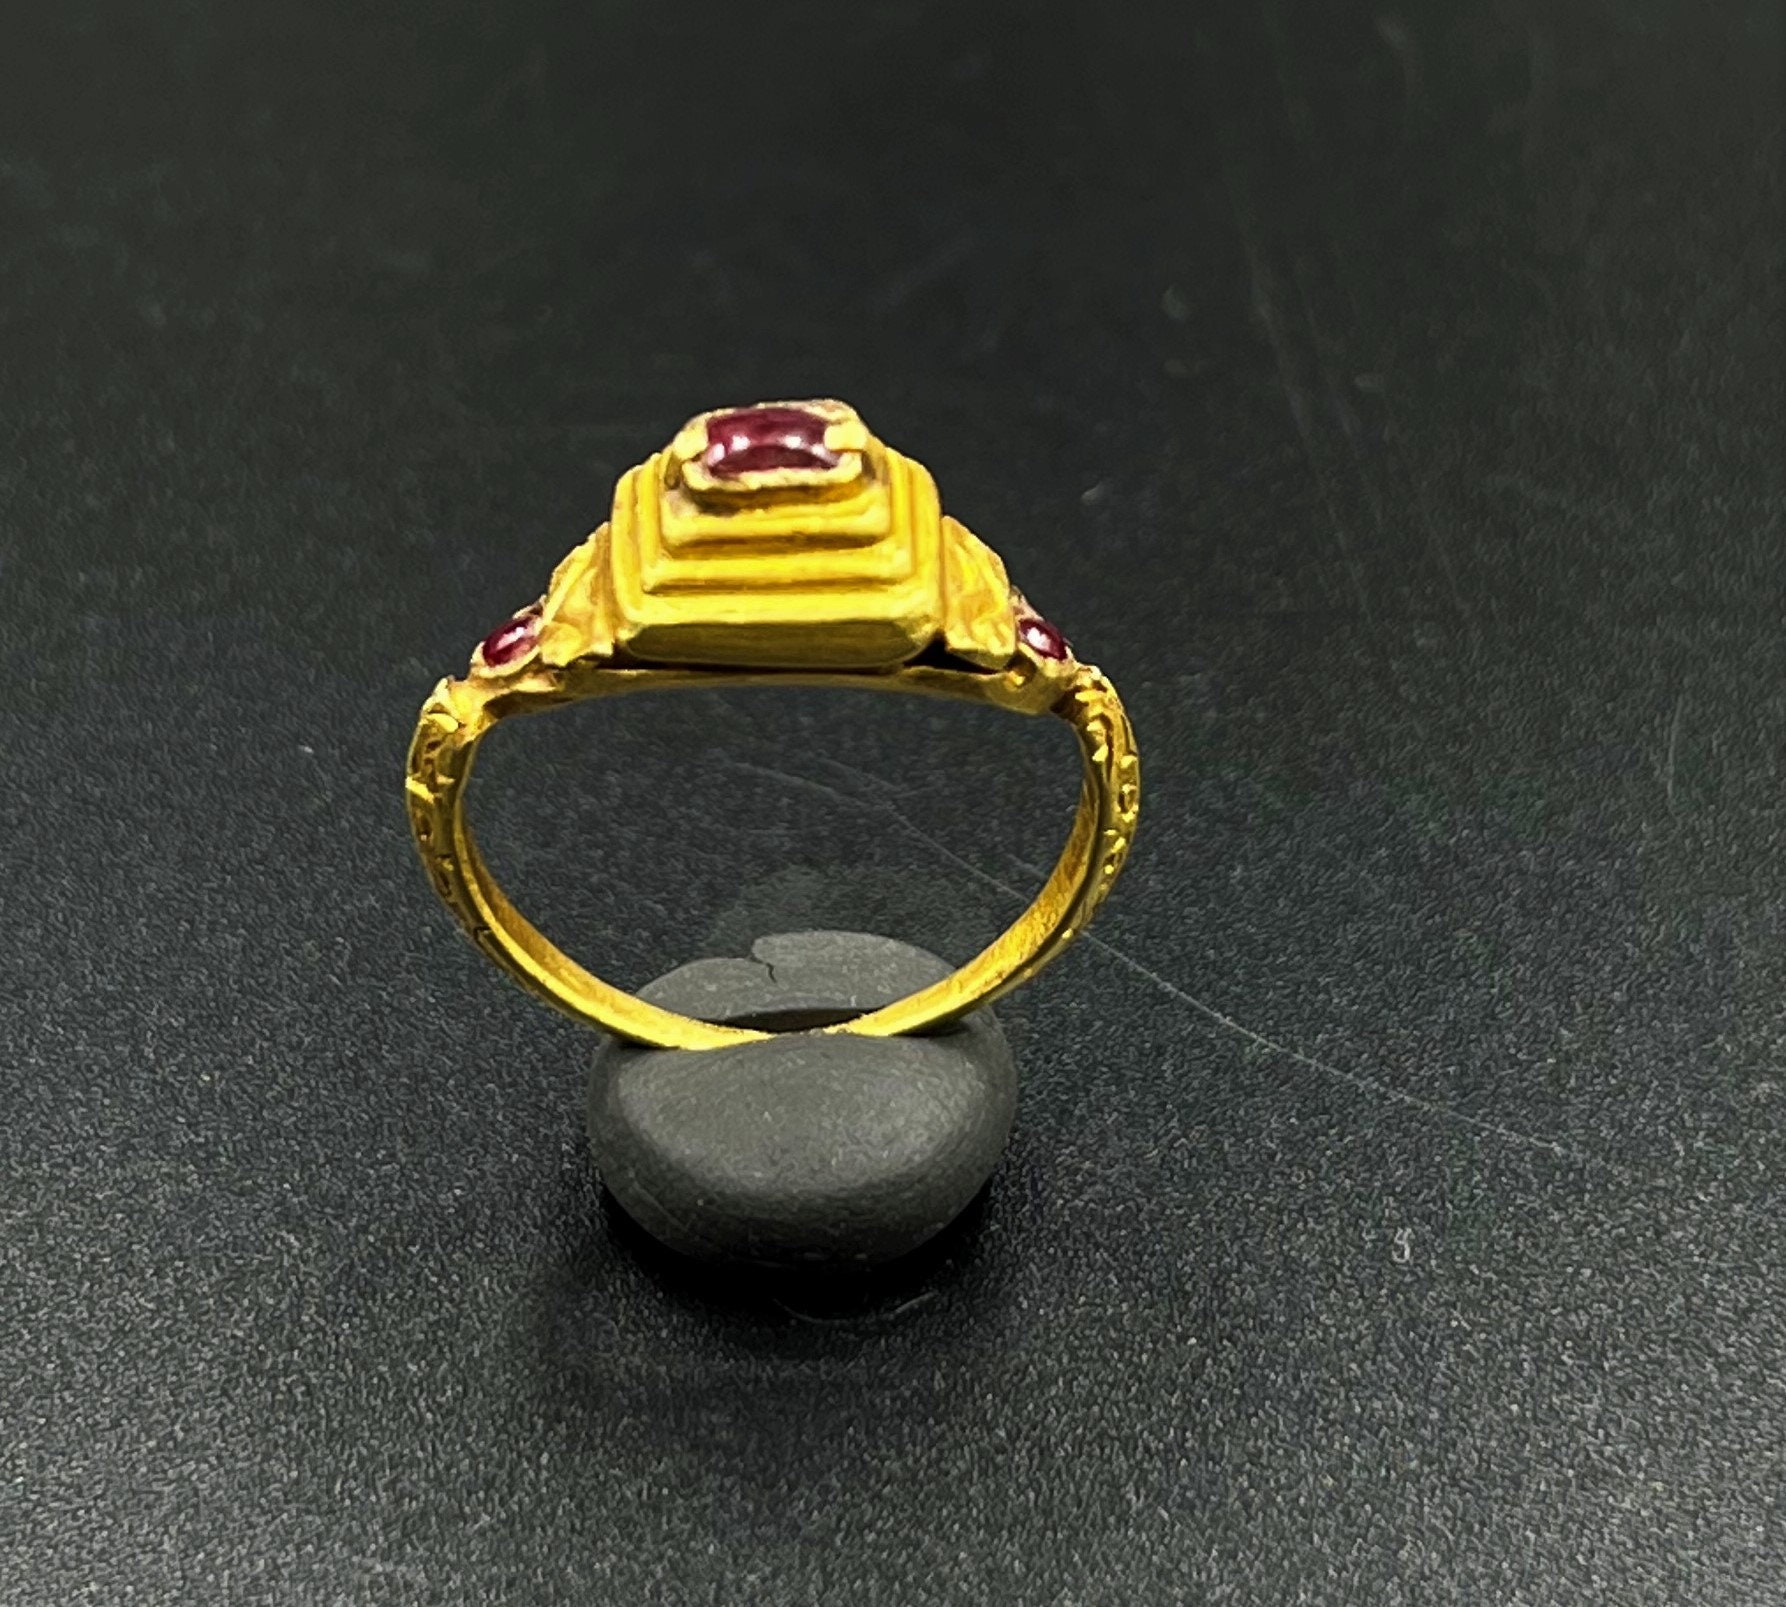 Antique South East Asian Art Vintage Gold Gems Jewelry Hand Made Gold Ring  .18K